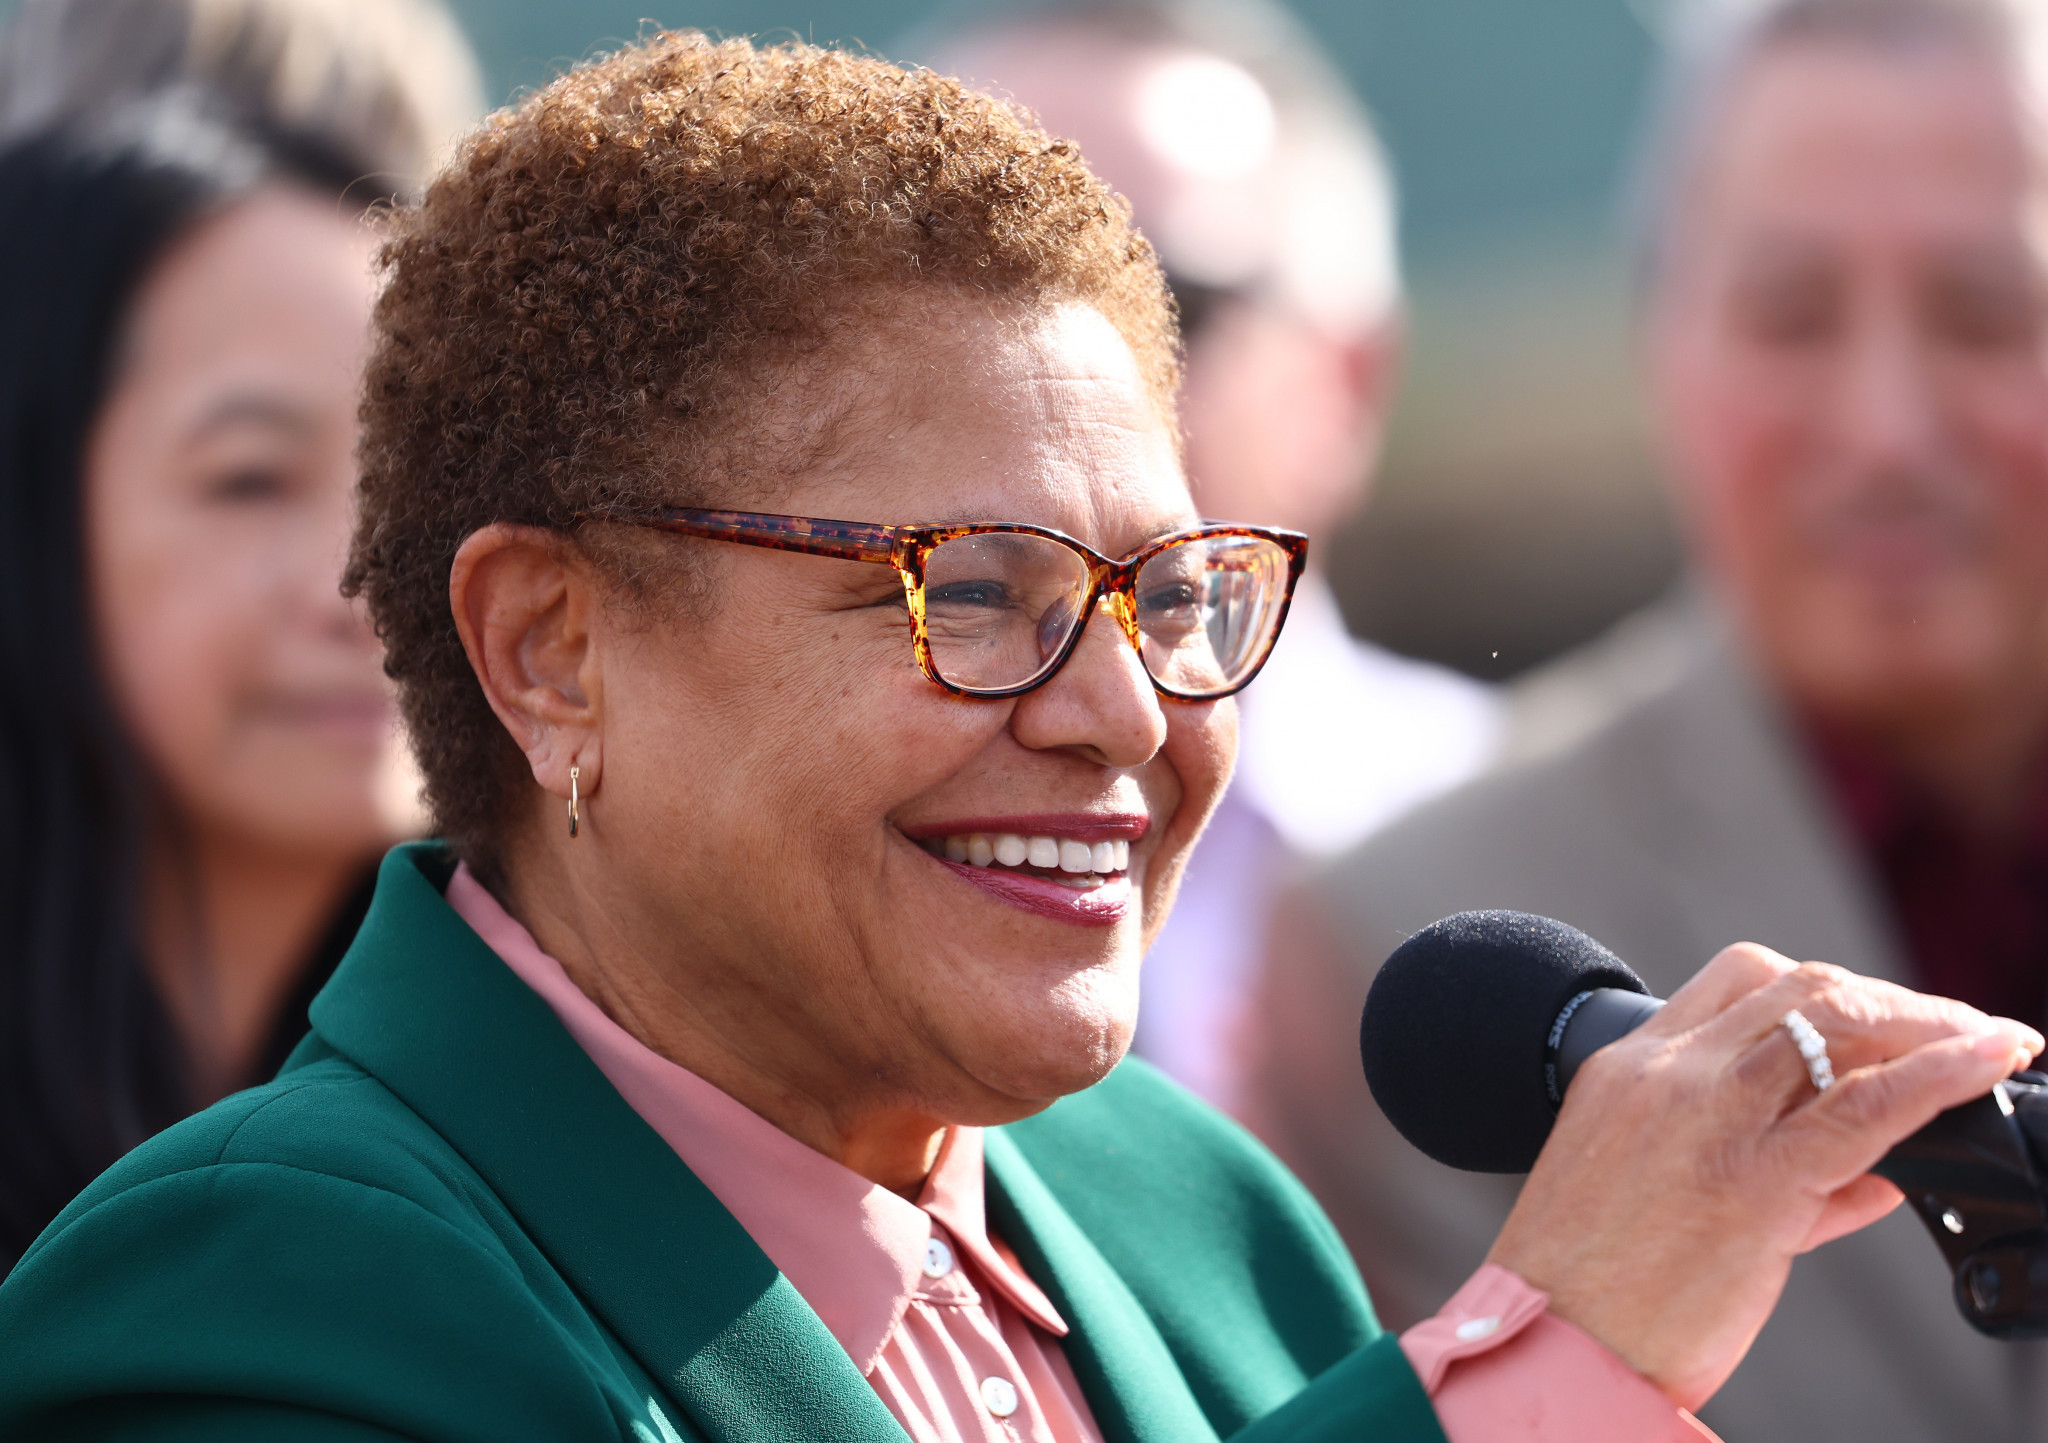 Los Angeles Mayor Karen Bass appointed Metro chair prior to 2028 Olympics